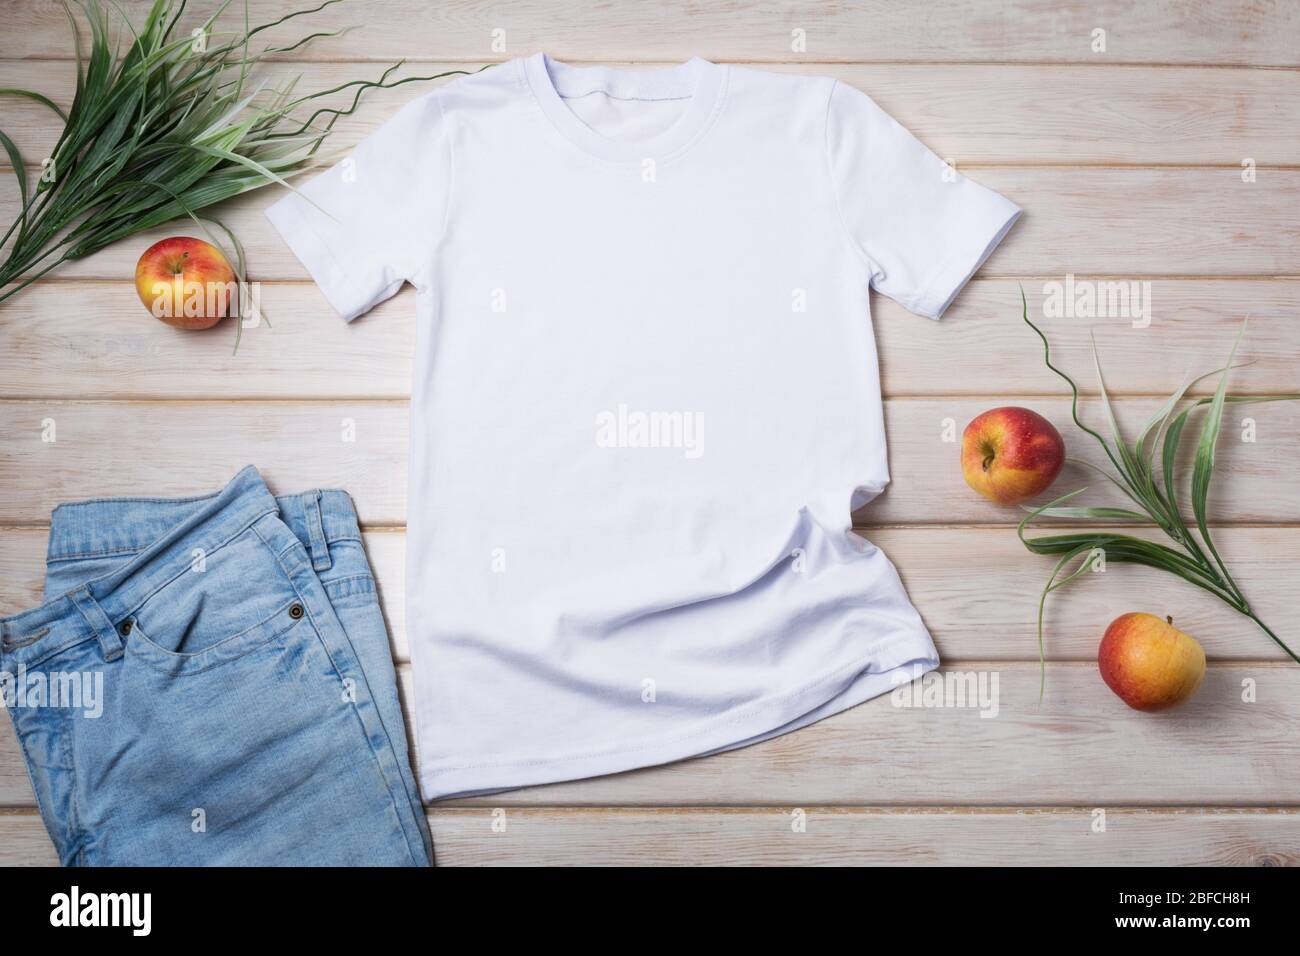 White unisex cotton T-shirt mockup with green grass and apples. Design t shirt template, tee print presentation mock up Stock Photo